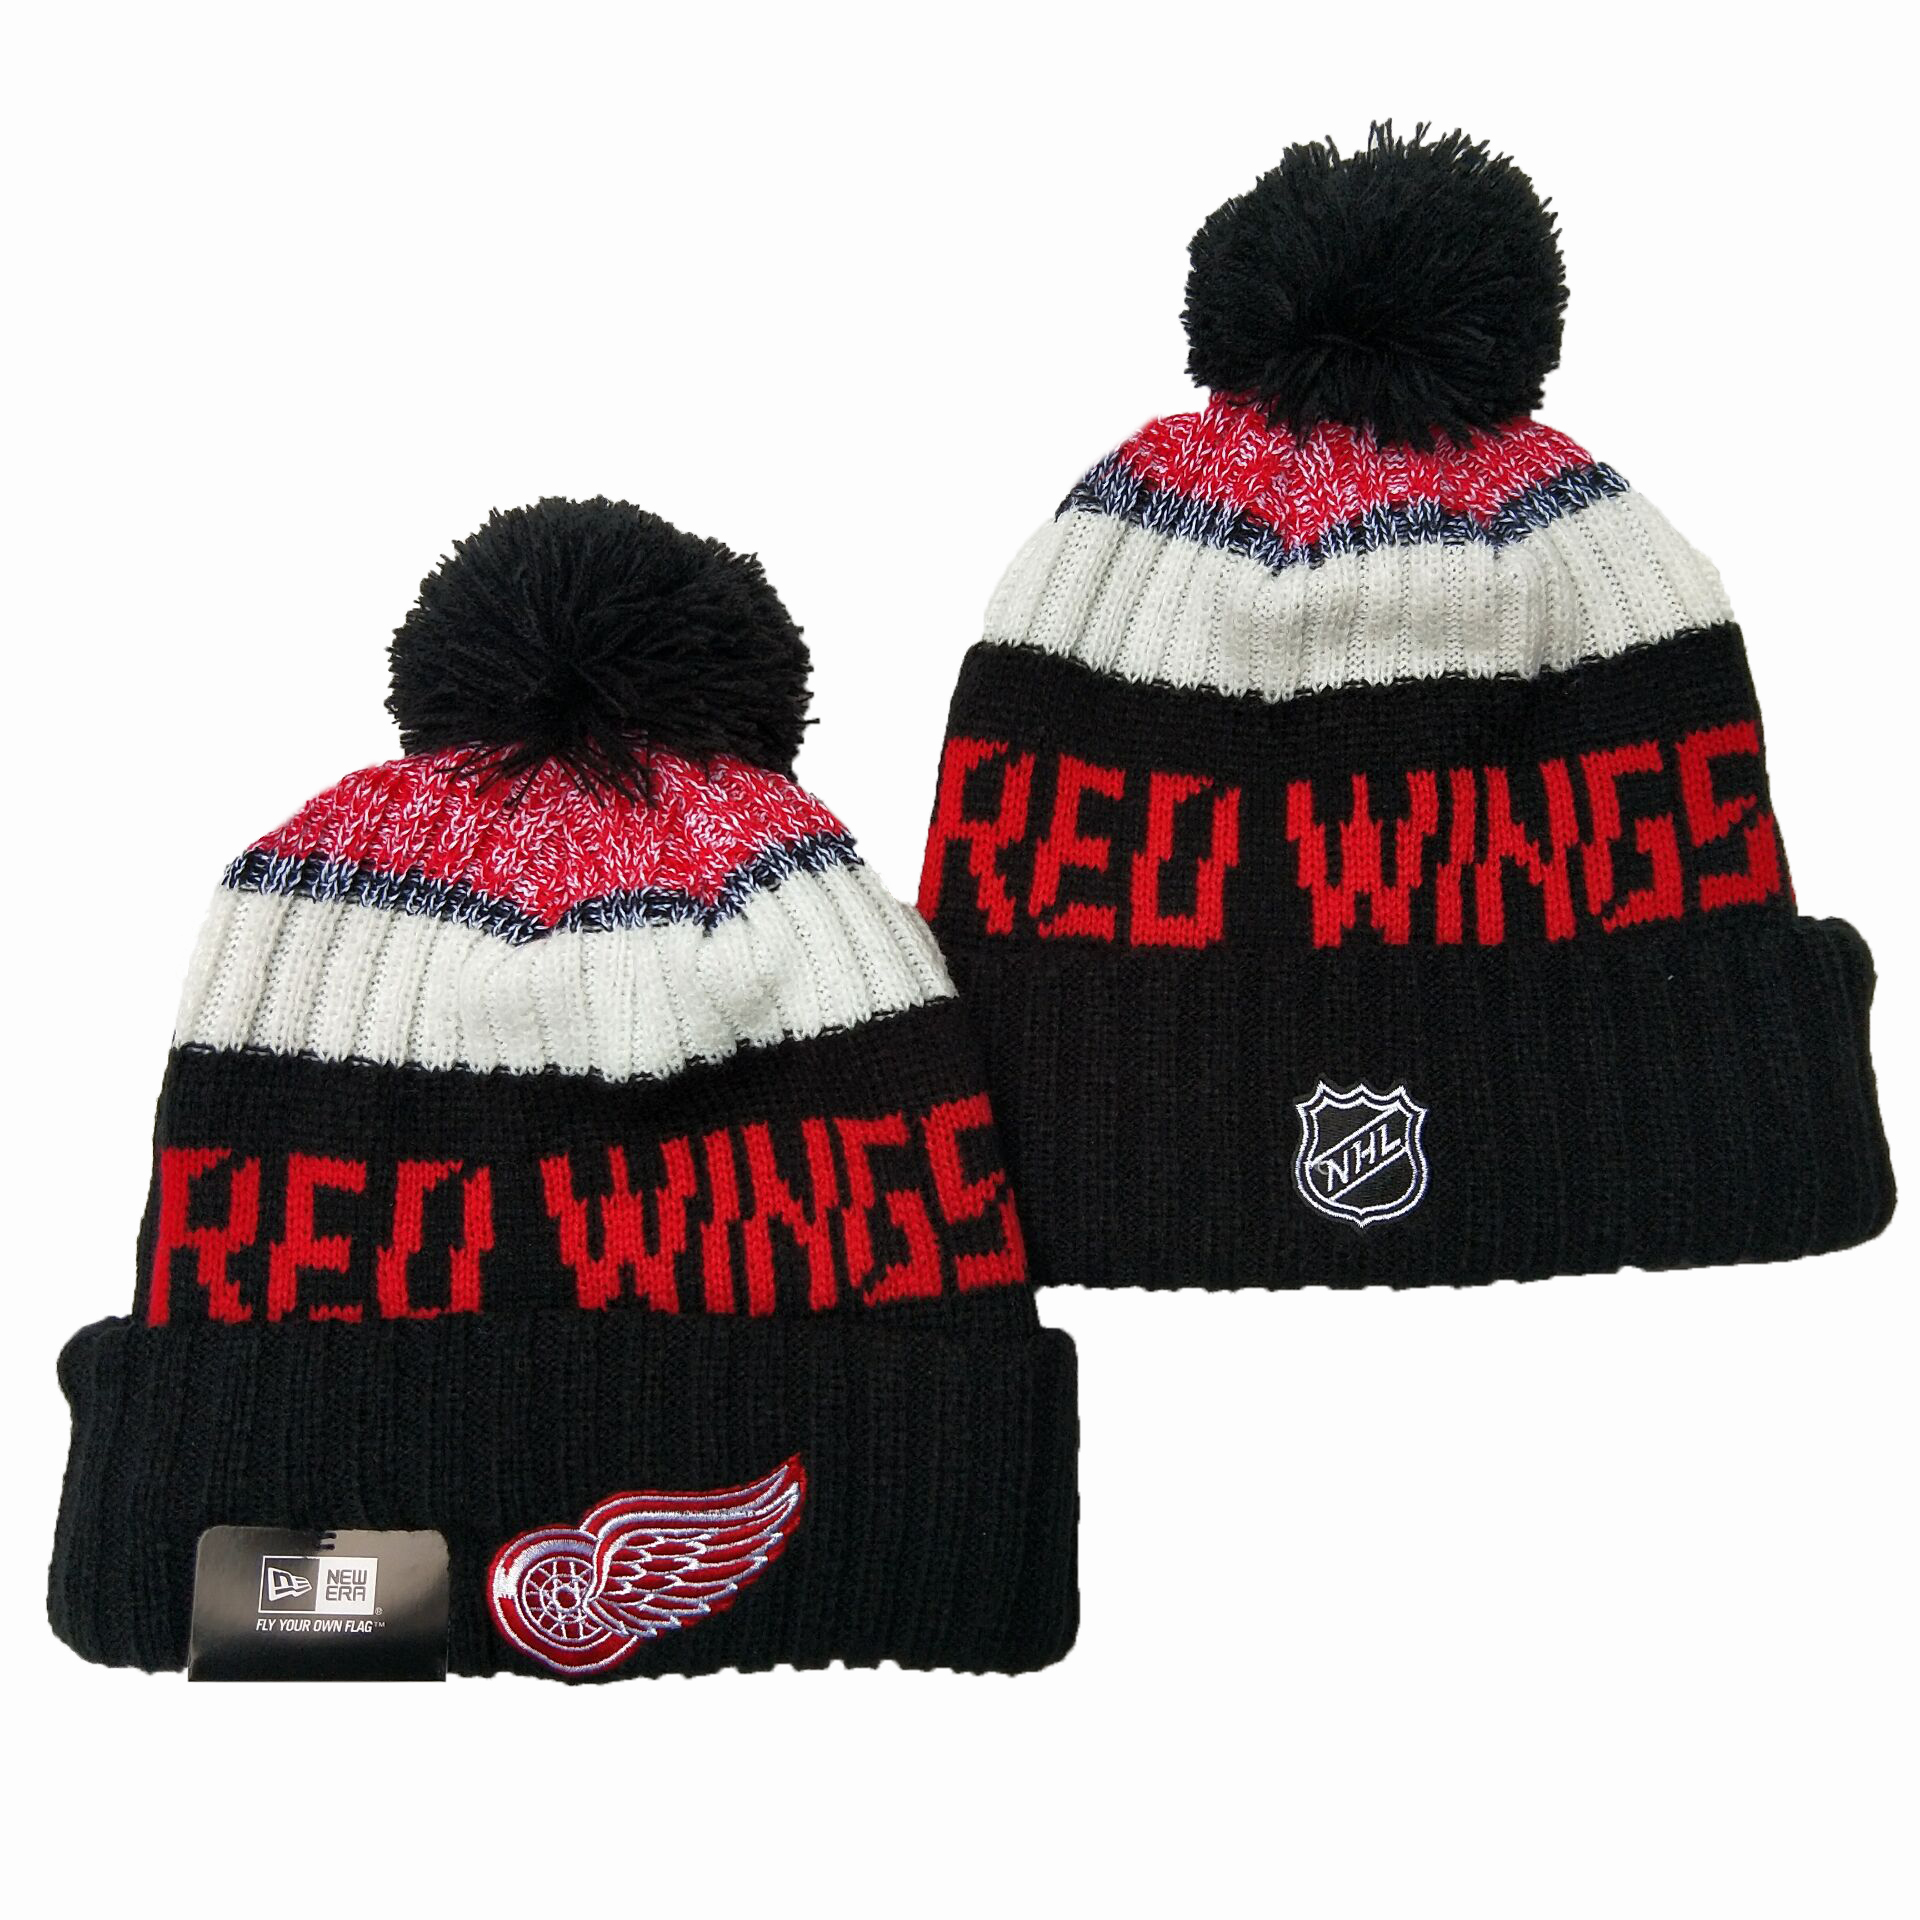 NHL Detroit Red Wings Beanies Knit Hats-YD1572